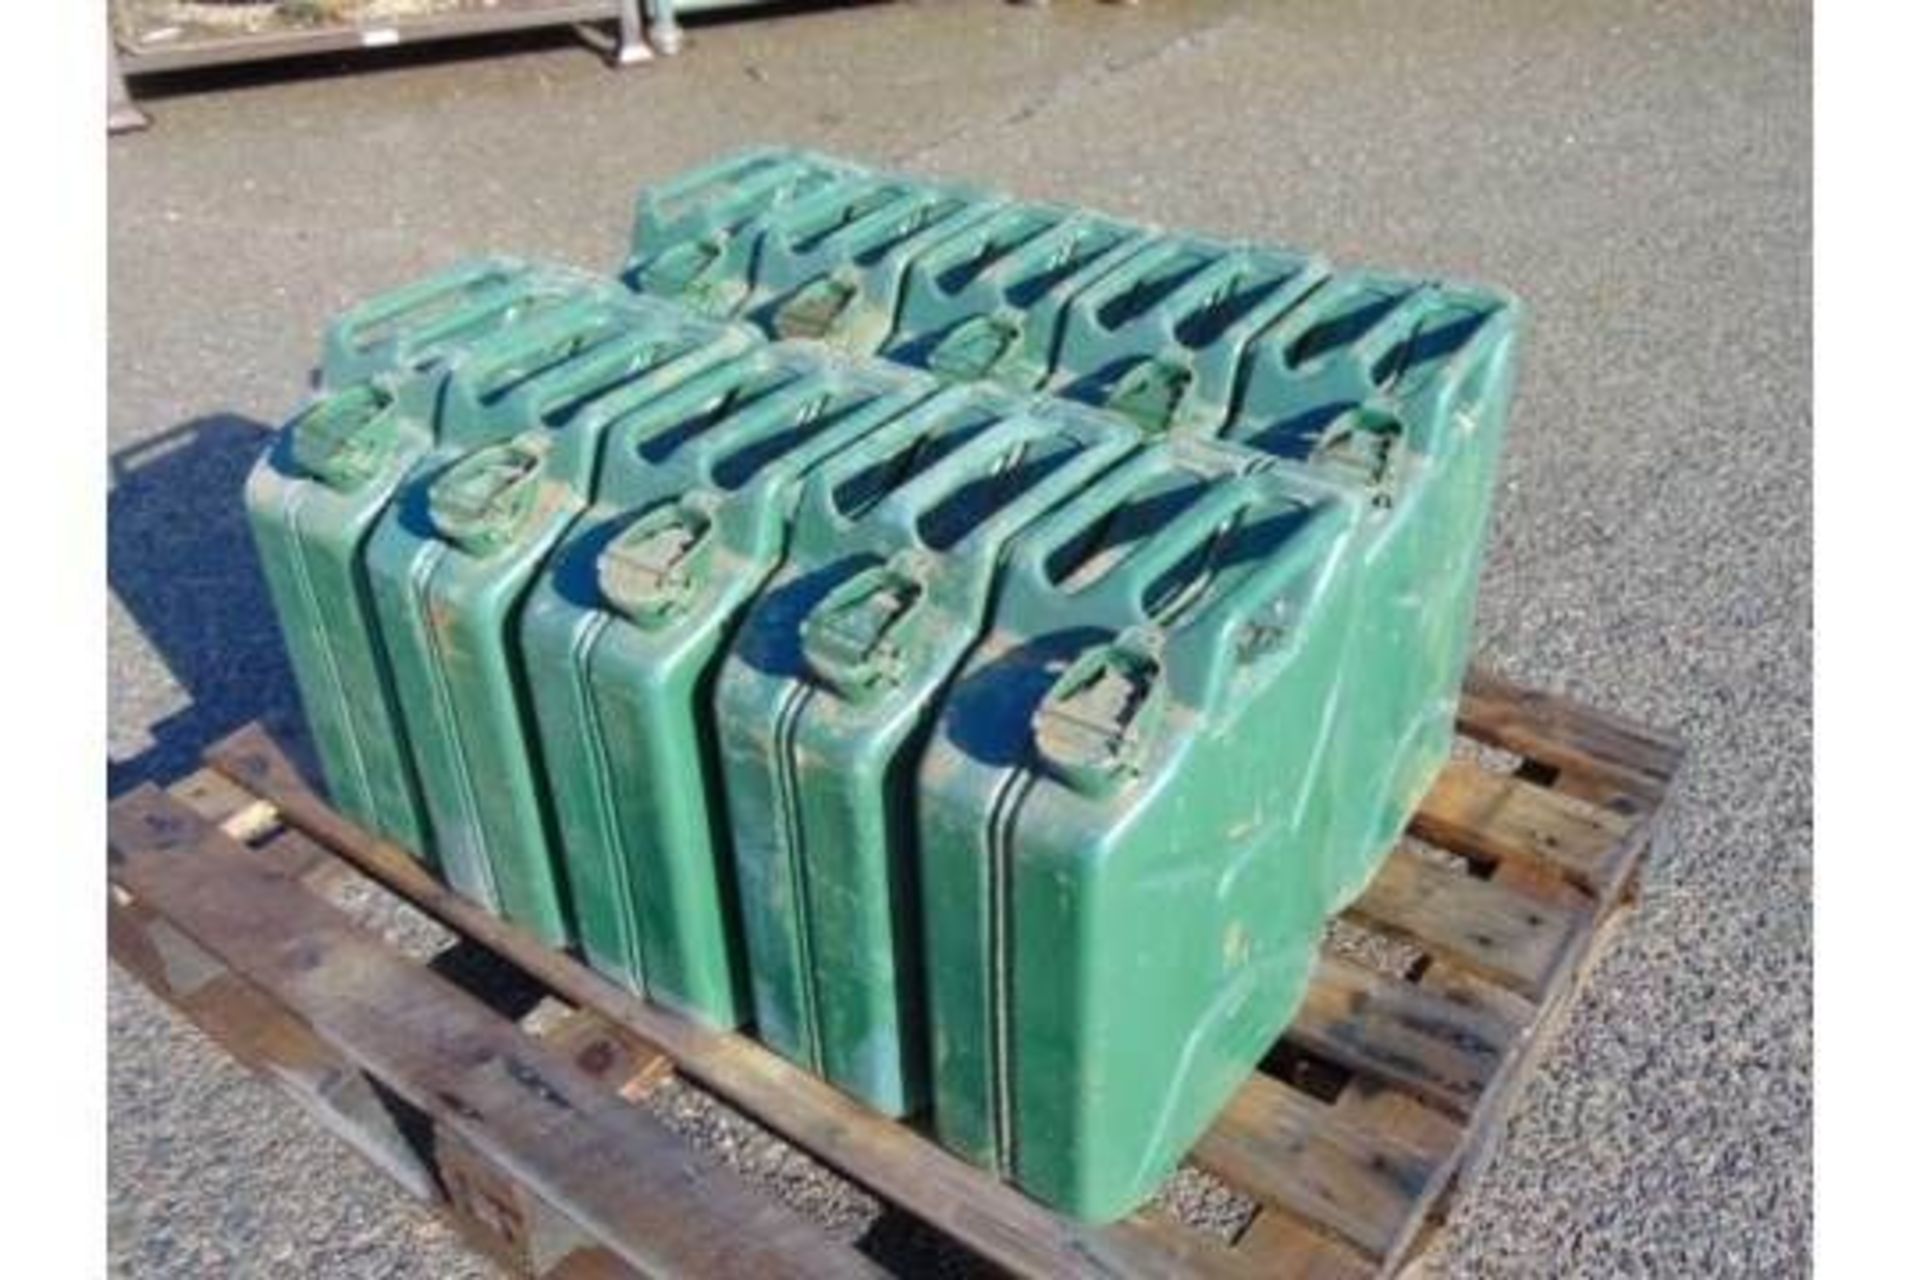 You are bidding on 20 x (2x10) Unissued NATO Issue 20L Jerry Cans - Image 2 of 7